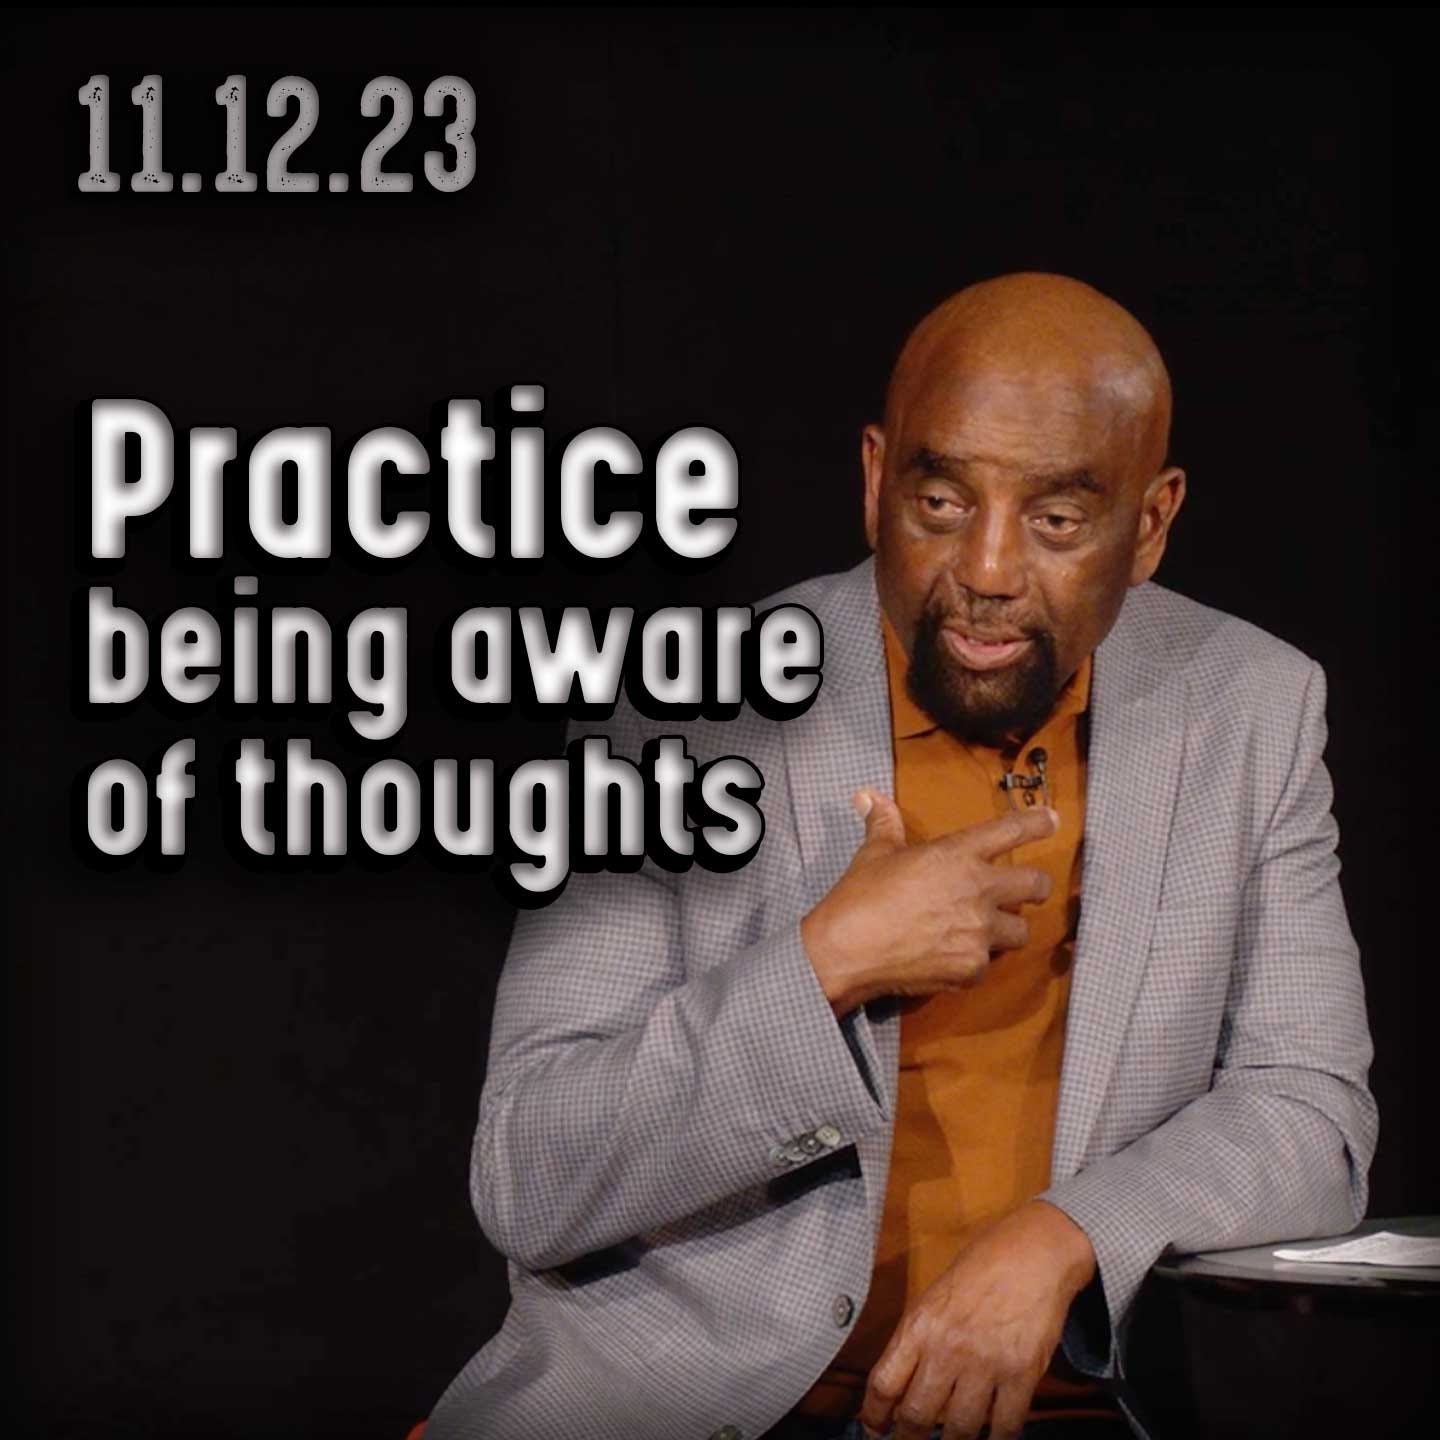 A Thought Is Just a Thought! | Church 11/12/23